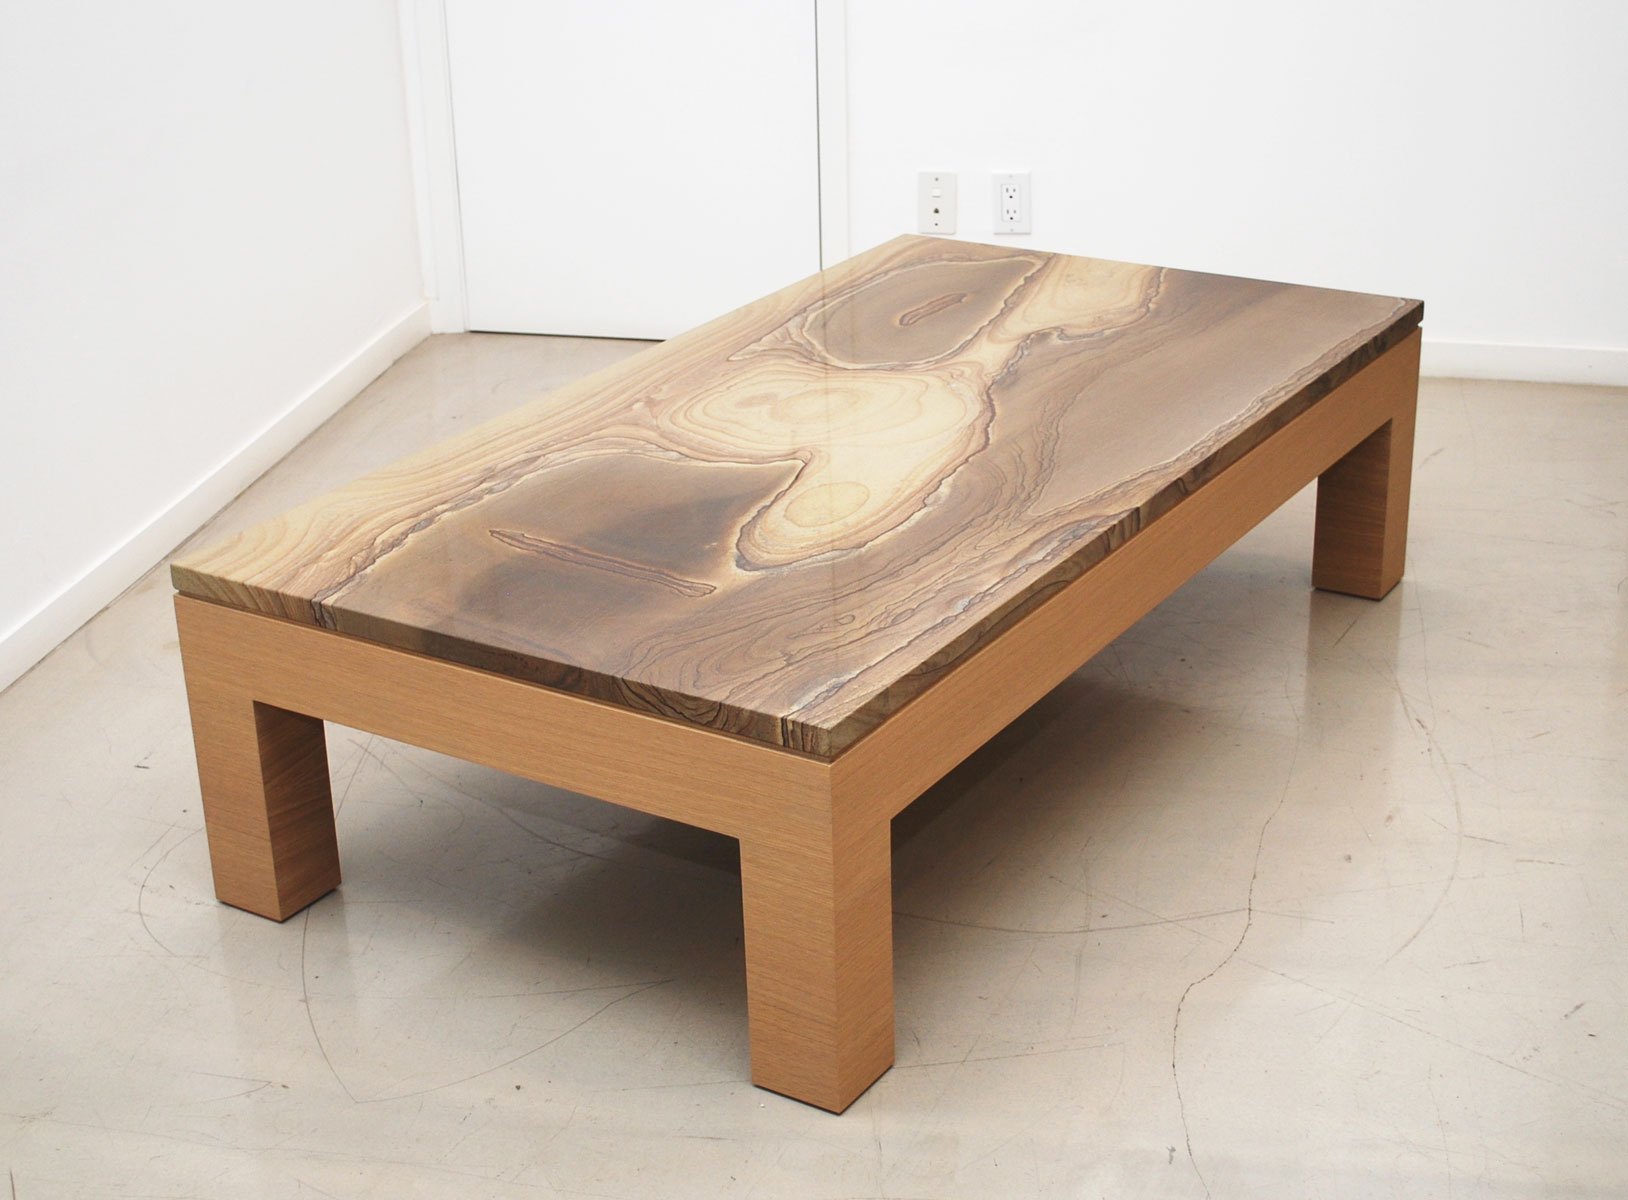 wooden coffee table design plans photo - 9